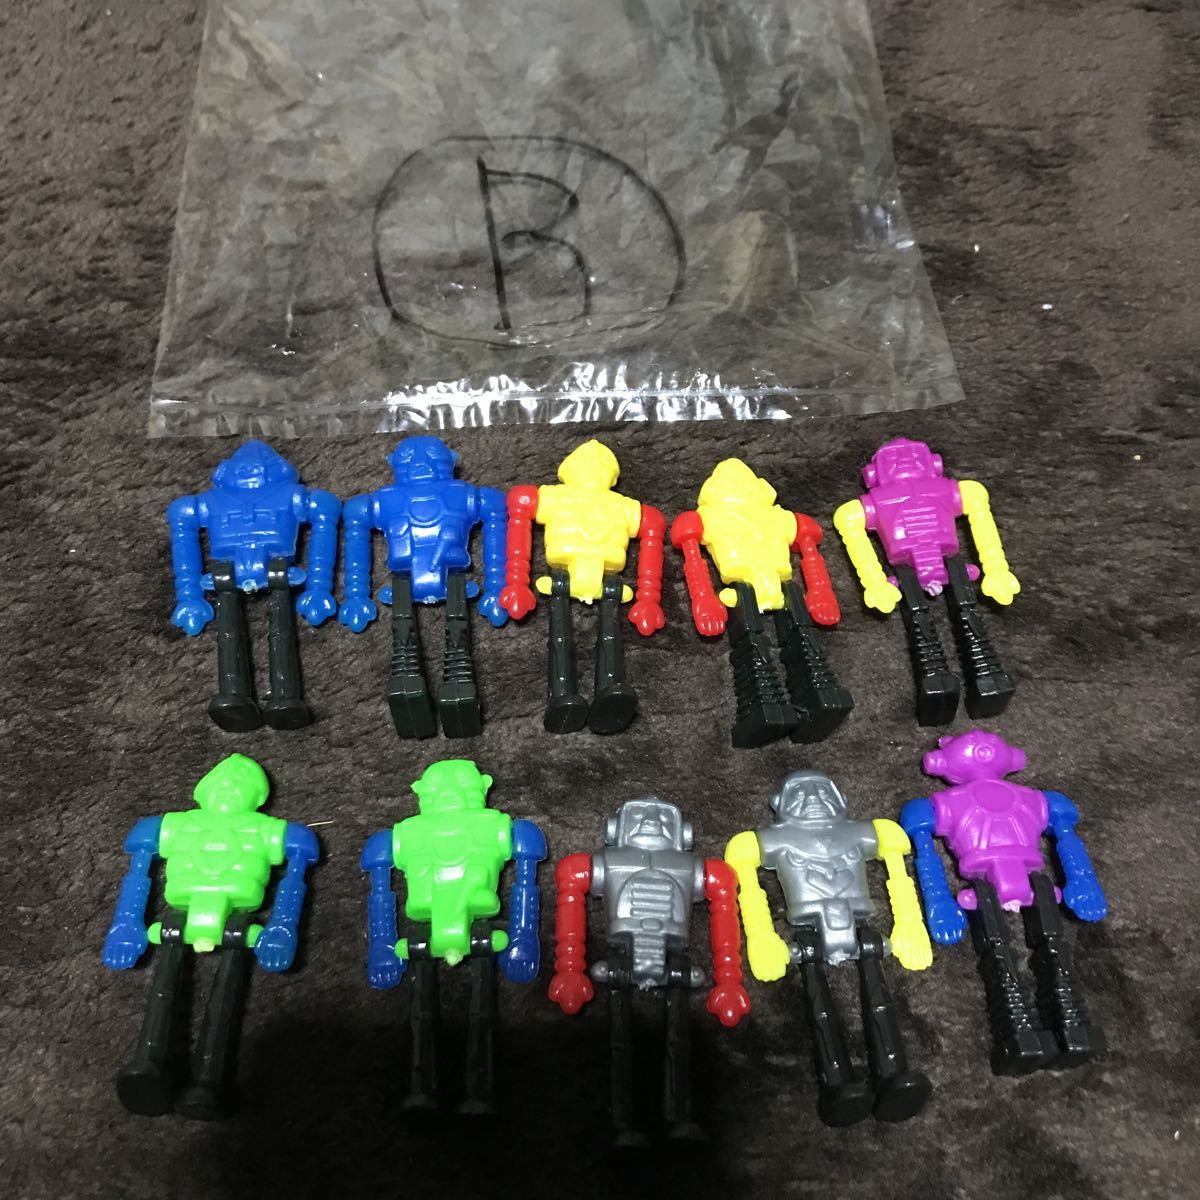  prompt decision free shipping B new goods rare Showa Retro that time thing mini figure extraterrestrial robot Pachi Glyco. extra? Cosmos? 10 piece 